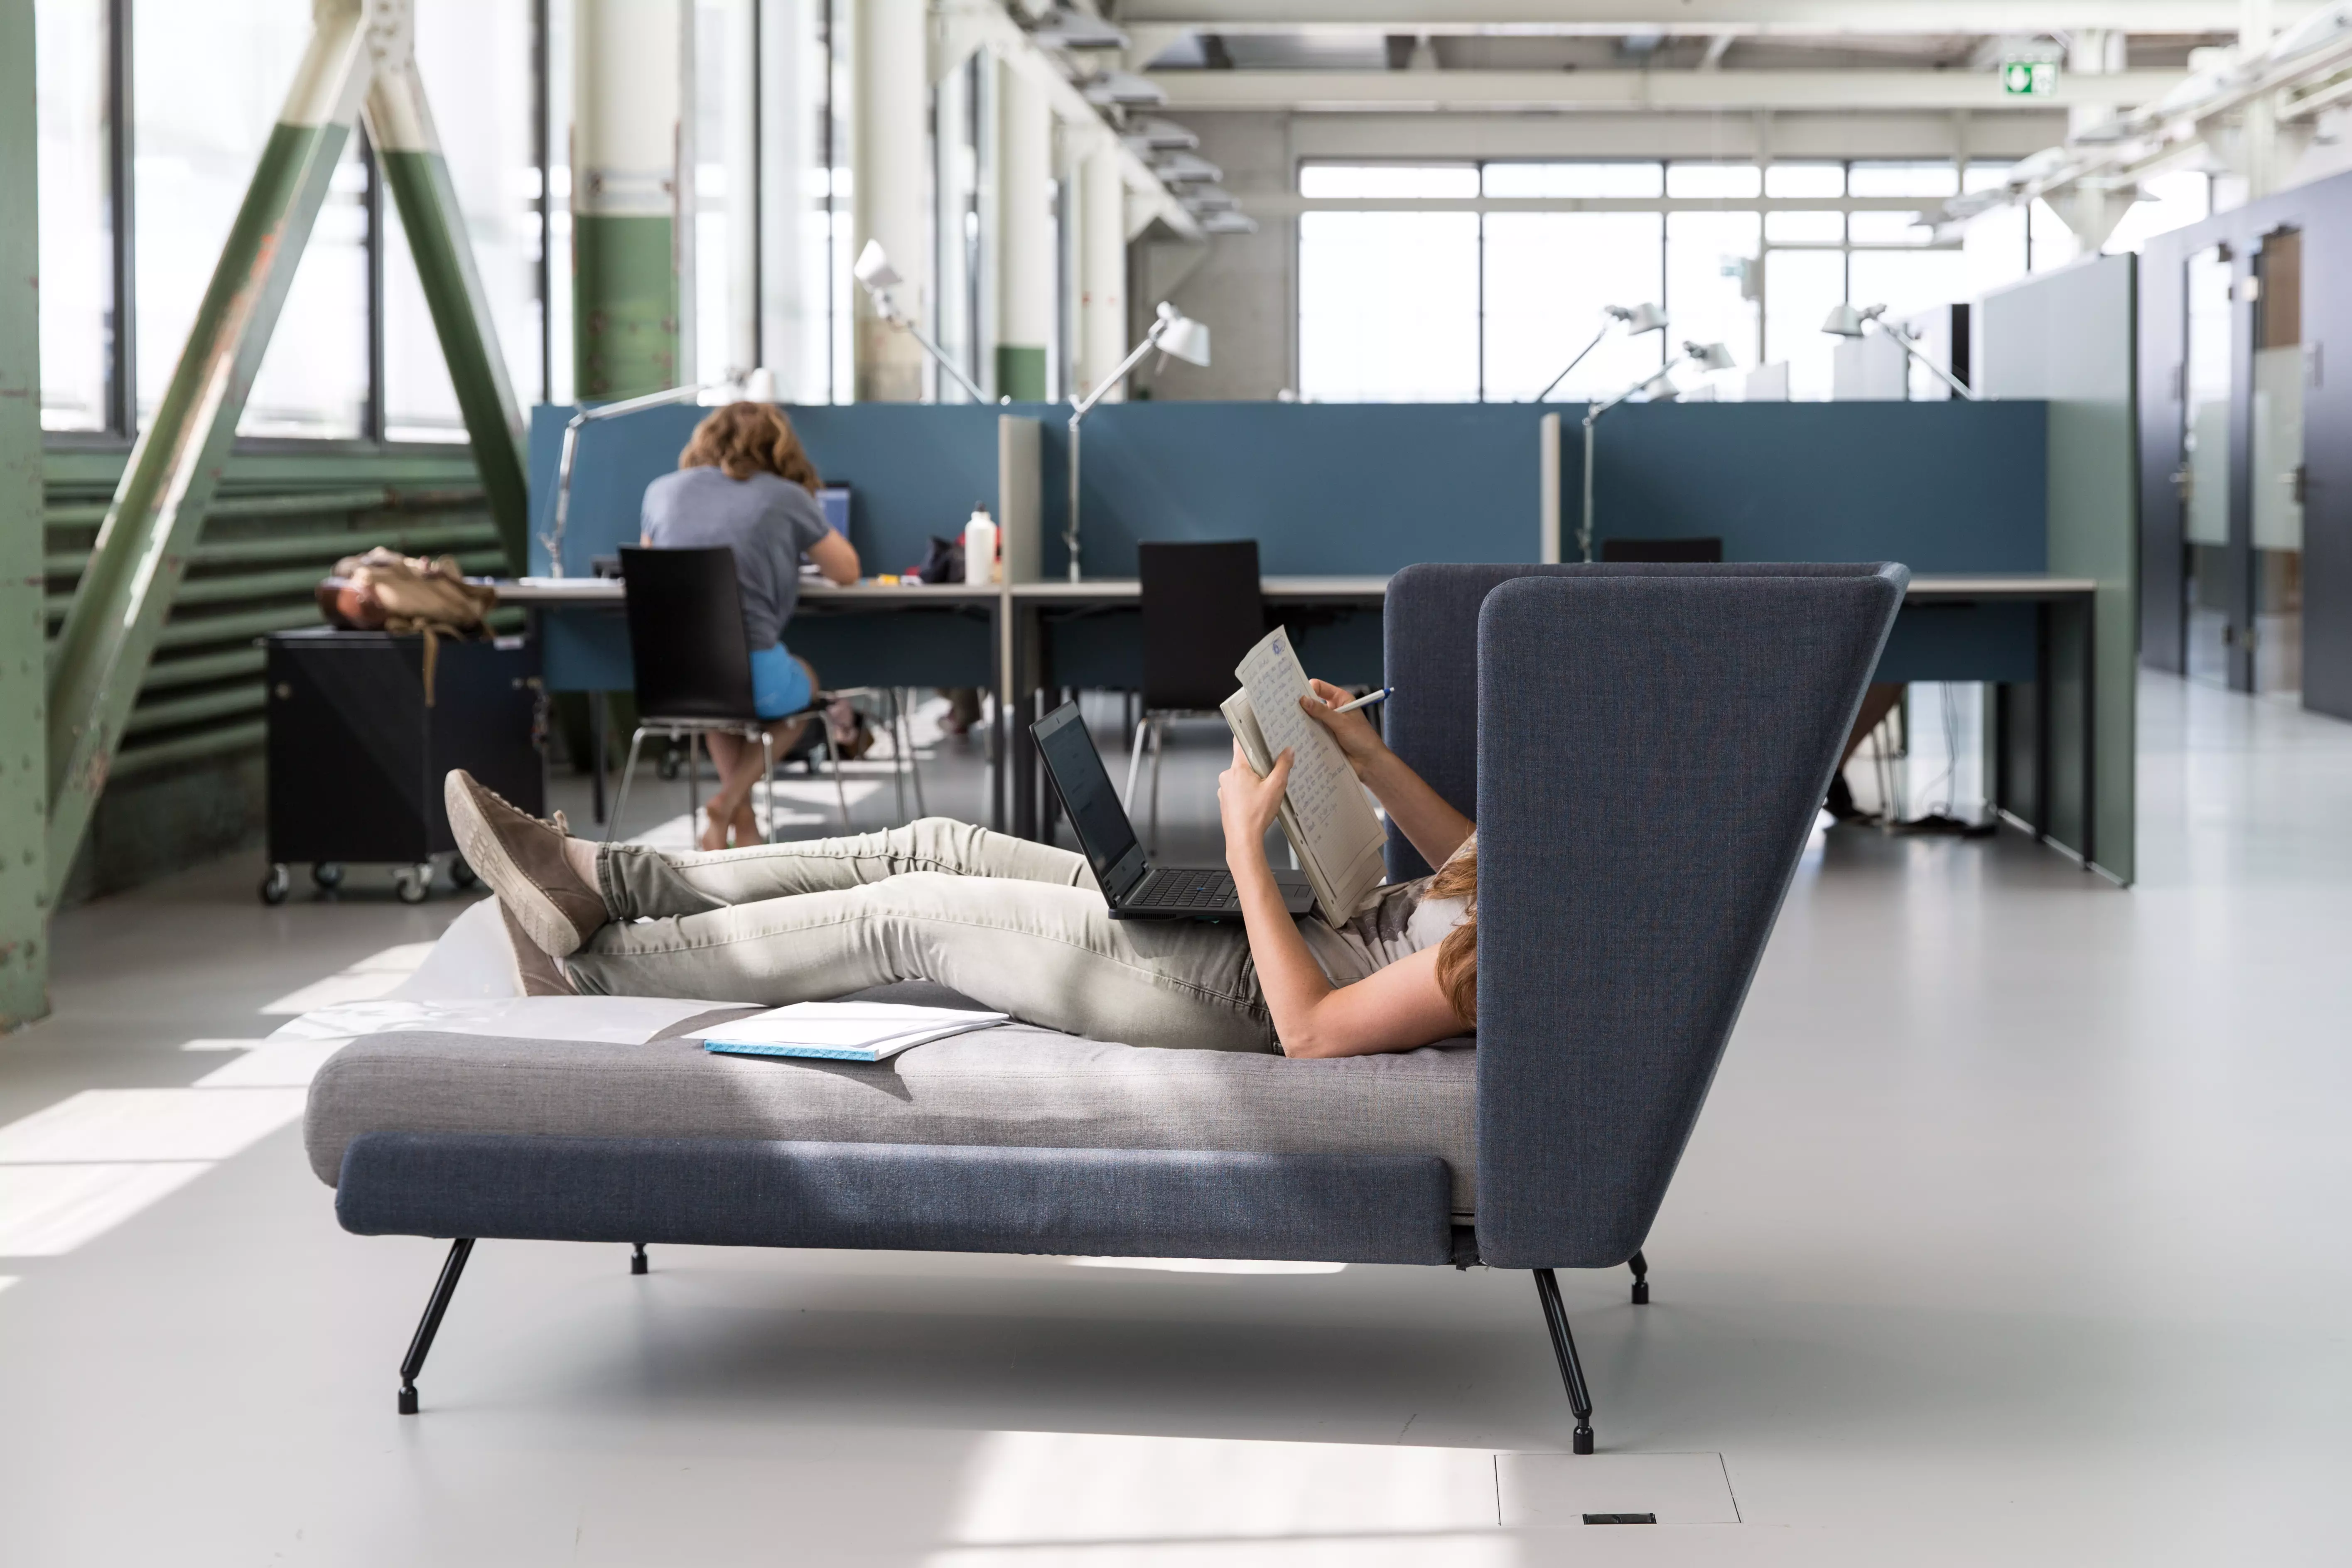 Sofas and individual workstations in the study environment at the University Library Winterthur.